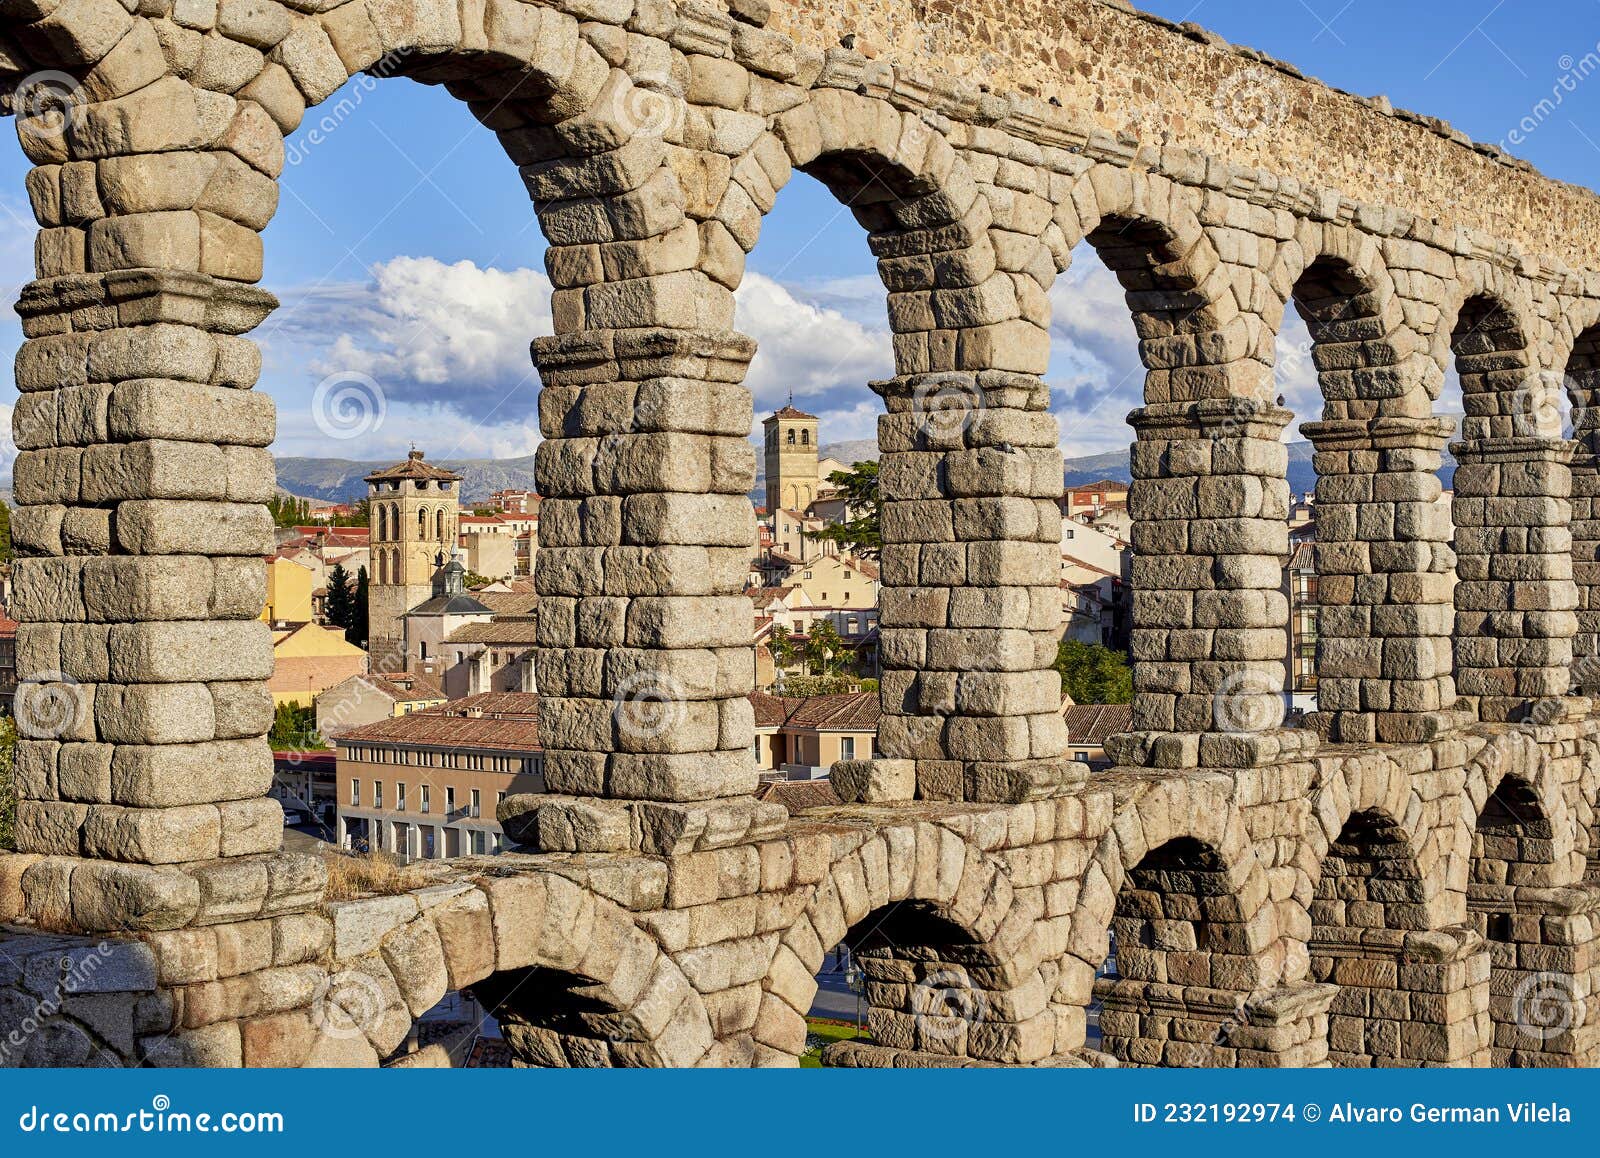 arch detail of the aqueduct of segovia, with the tower bell of the saint justo y pastor church in the background. view from